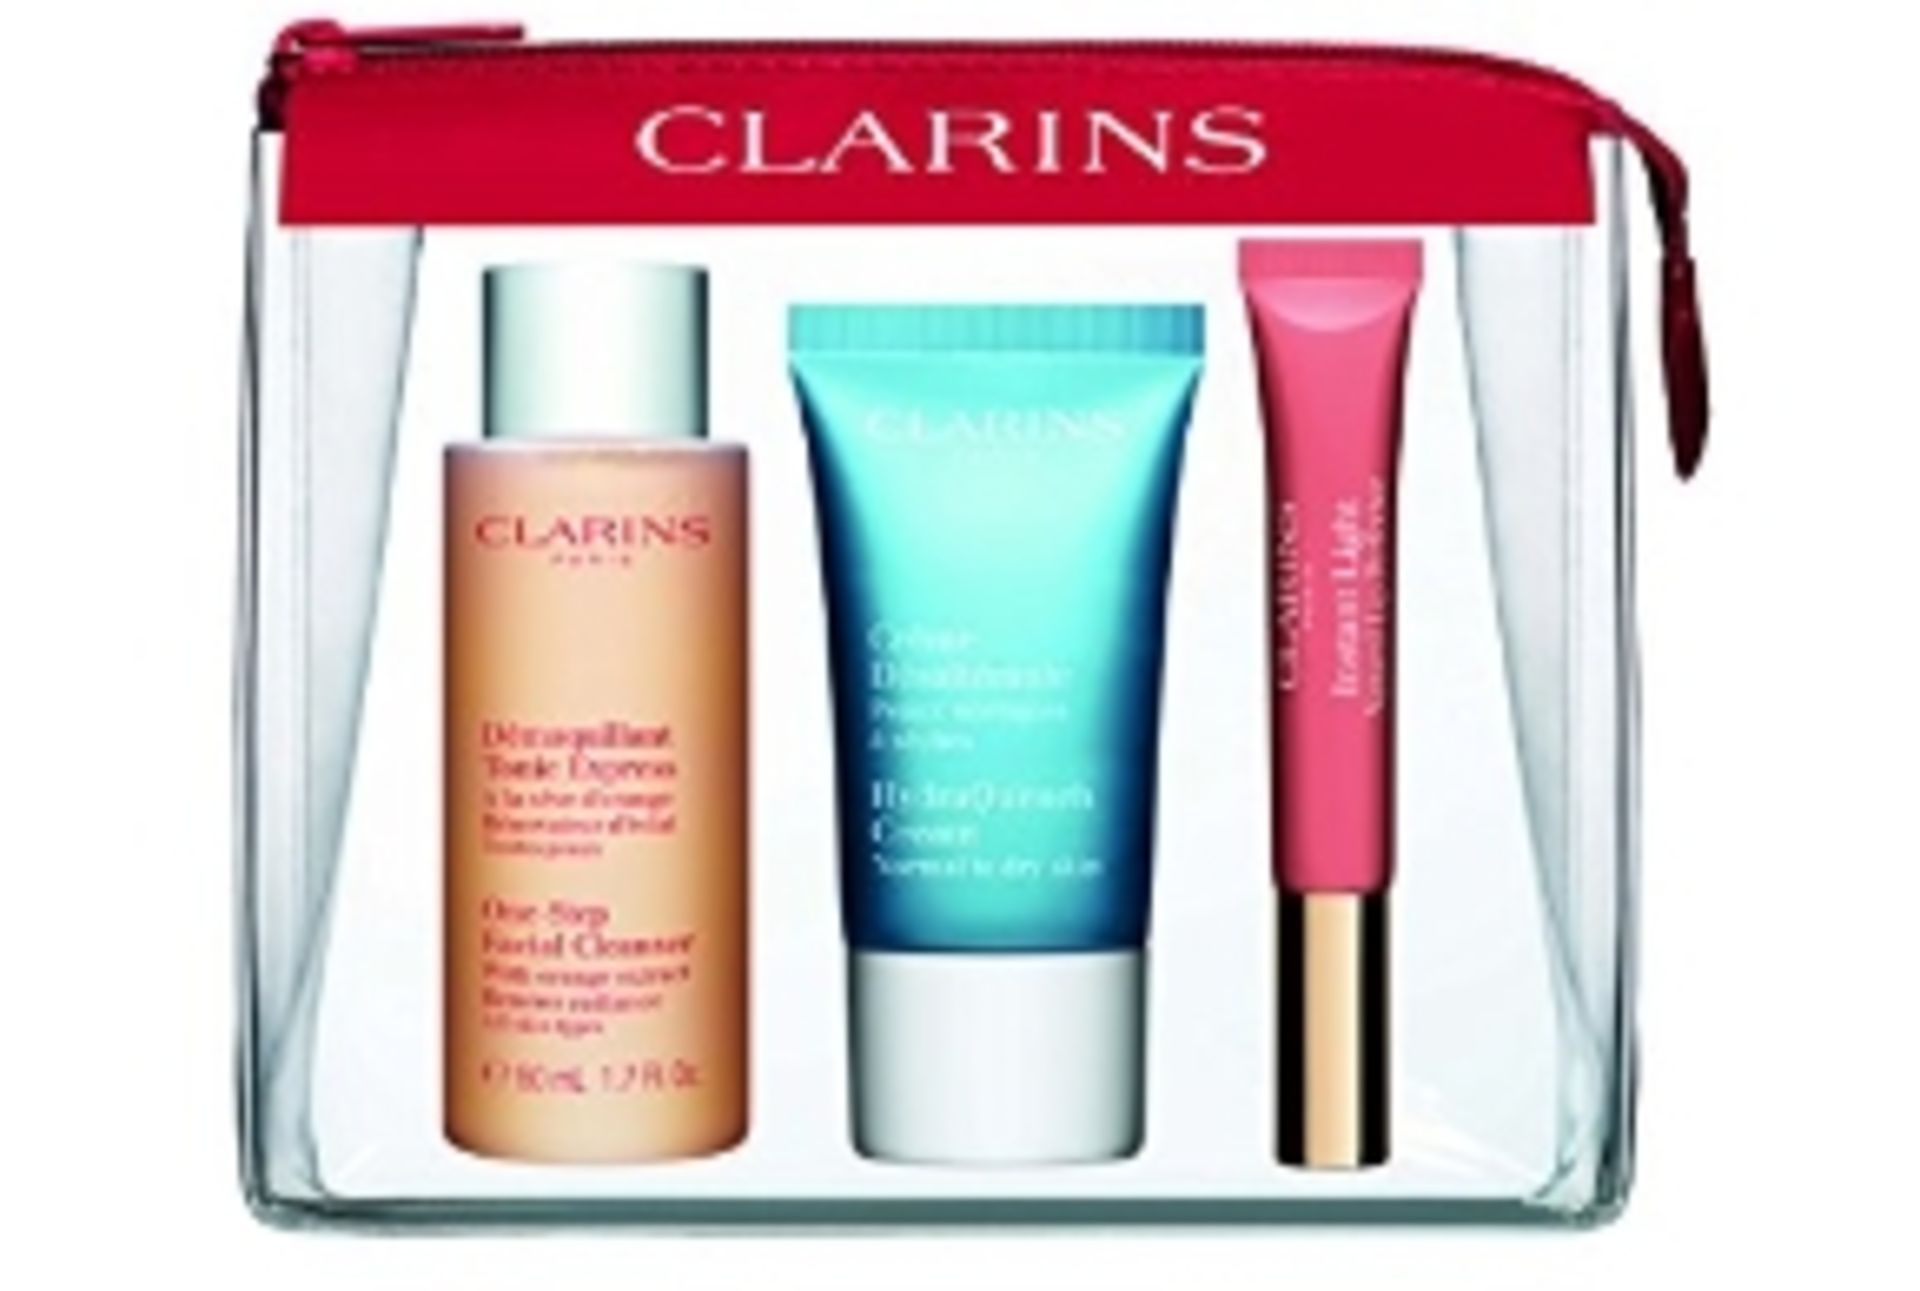 V Clarins face 3 piece gift set RRP28.30